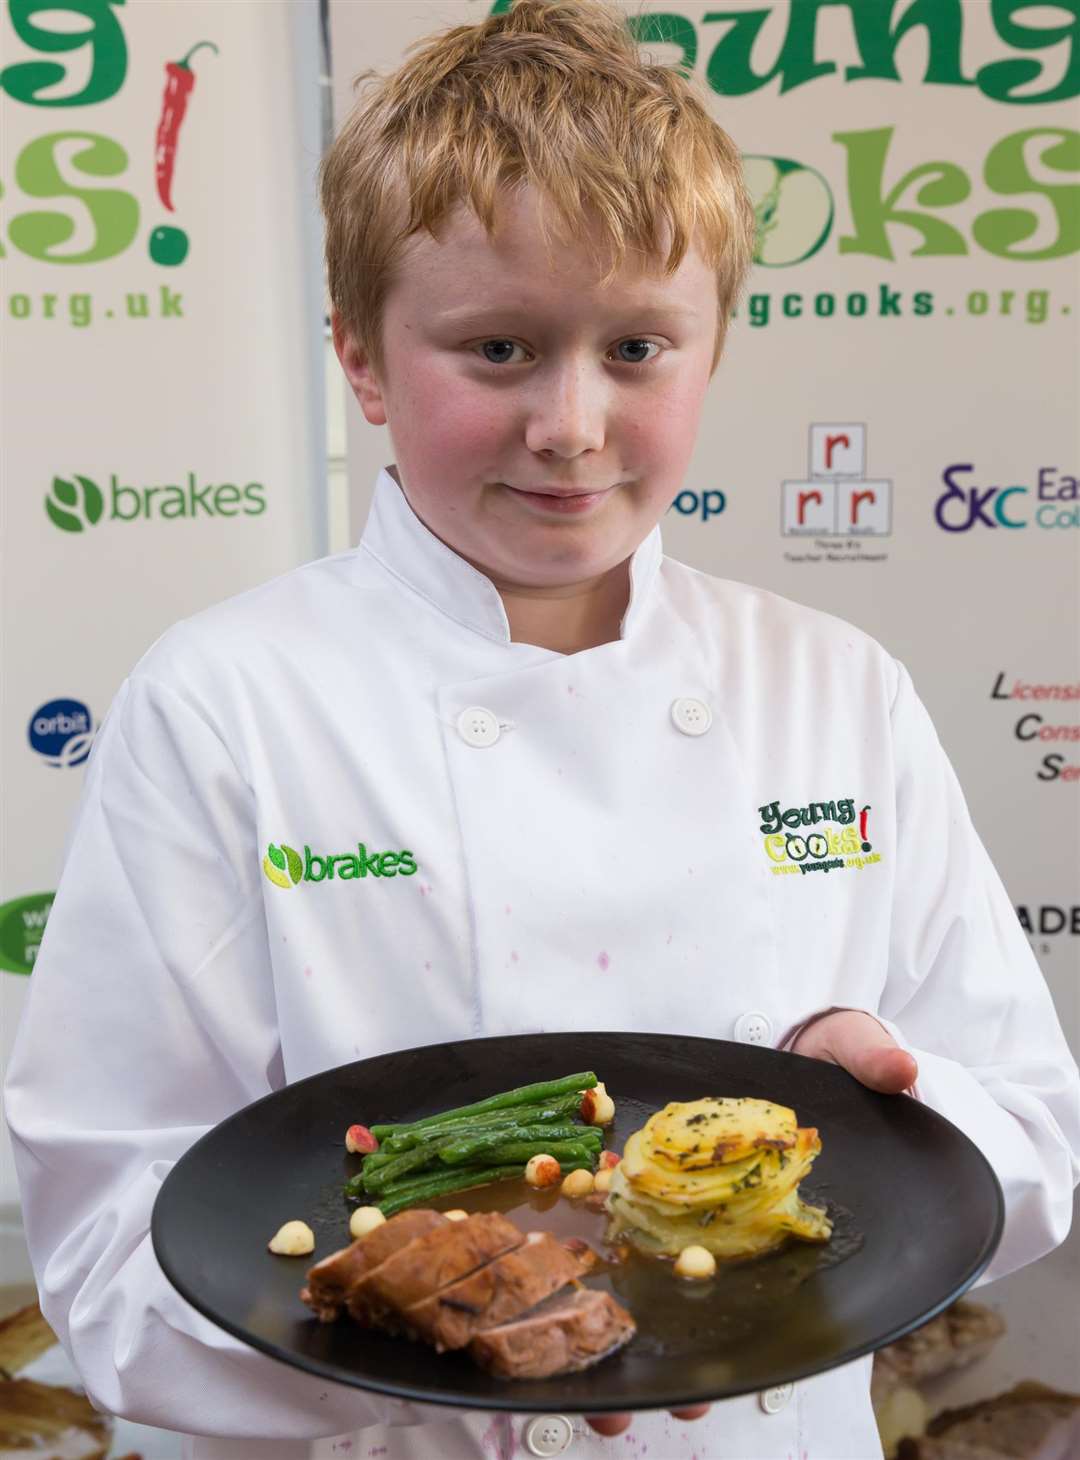 Secondary School entrant, Patrick Baron of St Johns Catholic Comprehensive, Gravesend..The final of Young Cooks. East Kent College, Broadstairs..Picture Submitted by: Martin Apps.KM Group has permission to sell this image via photo sales and to re-sell the image to other media for single-use publication.. (5726693)